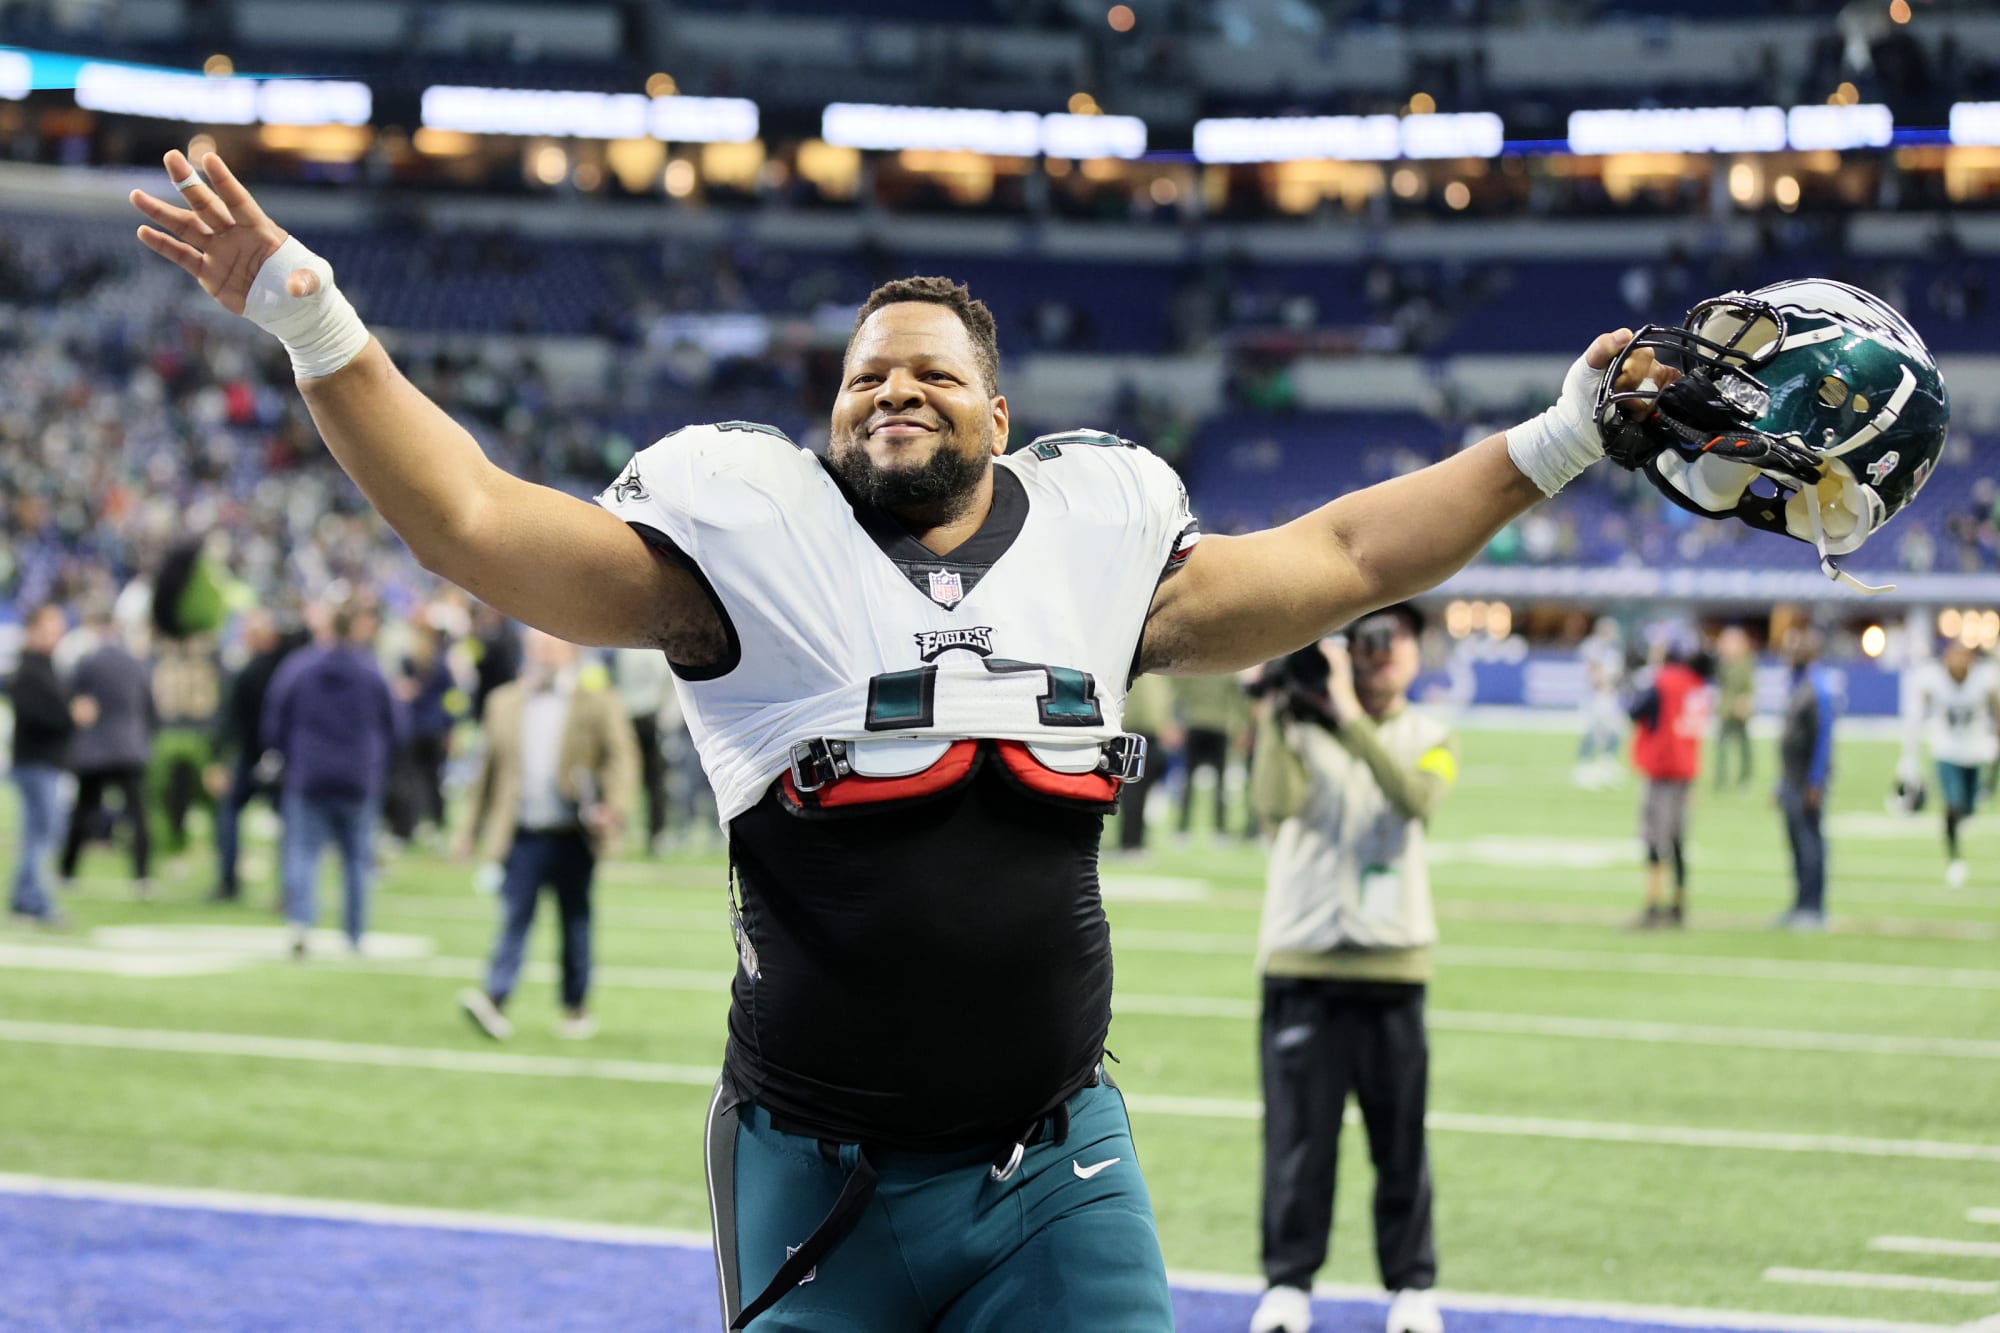 Ndamukong Suh continually uses his foundation to better the lives of others